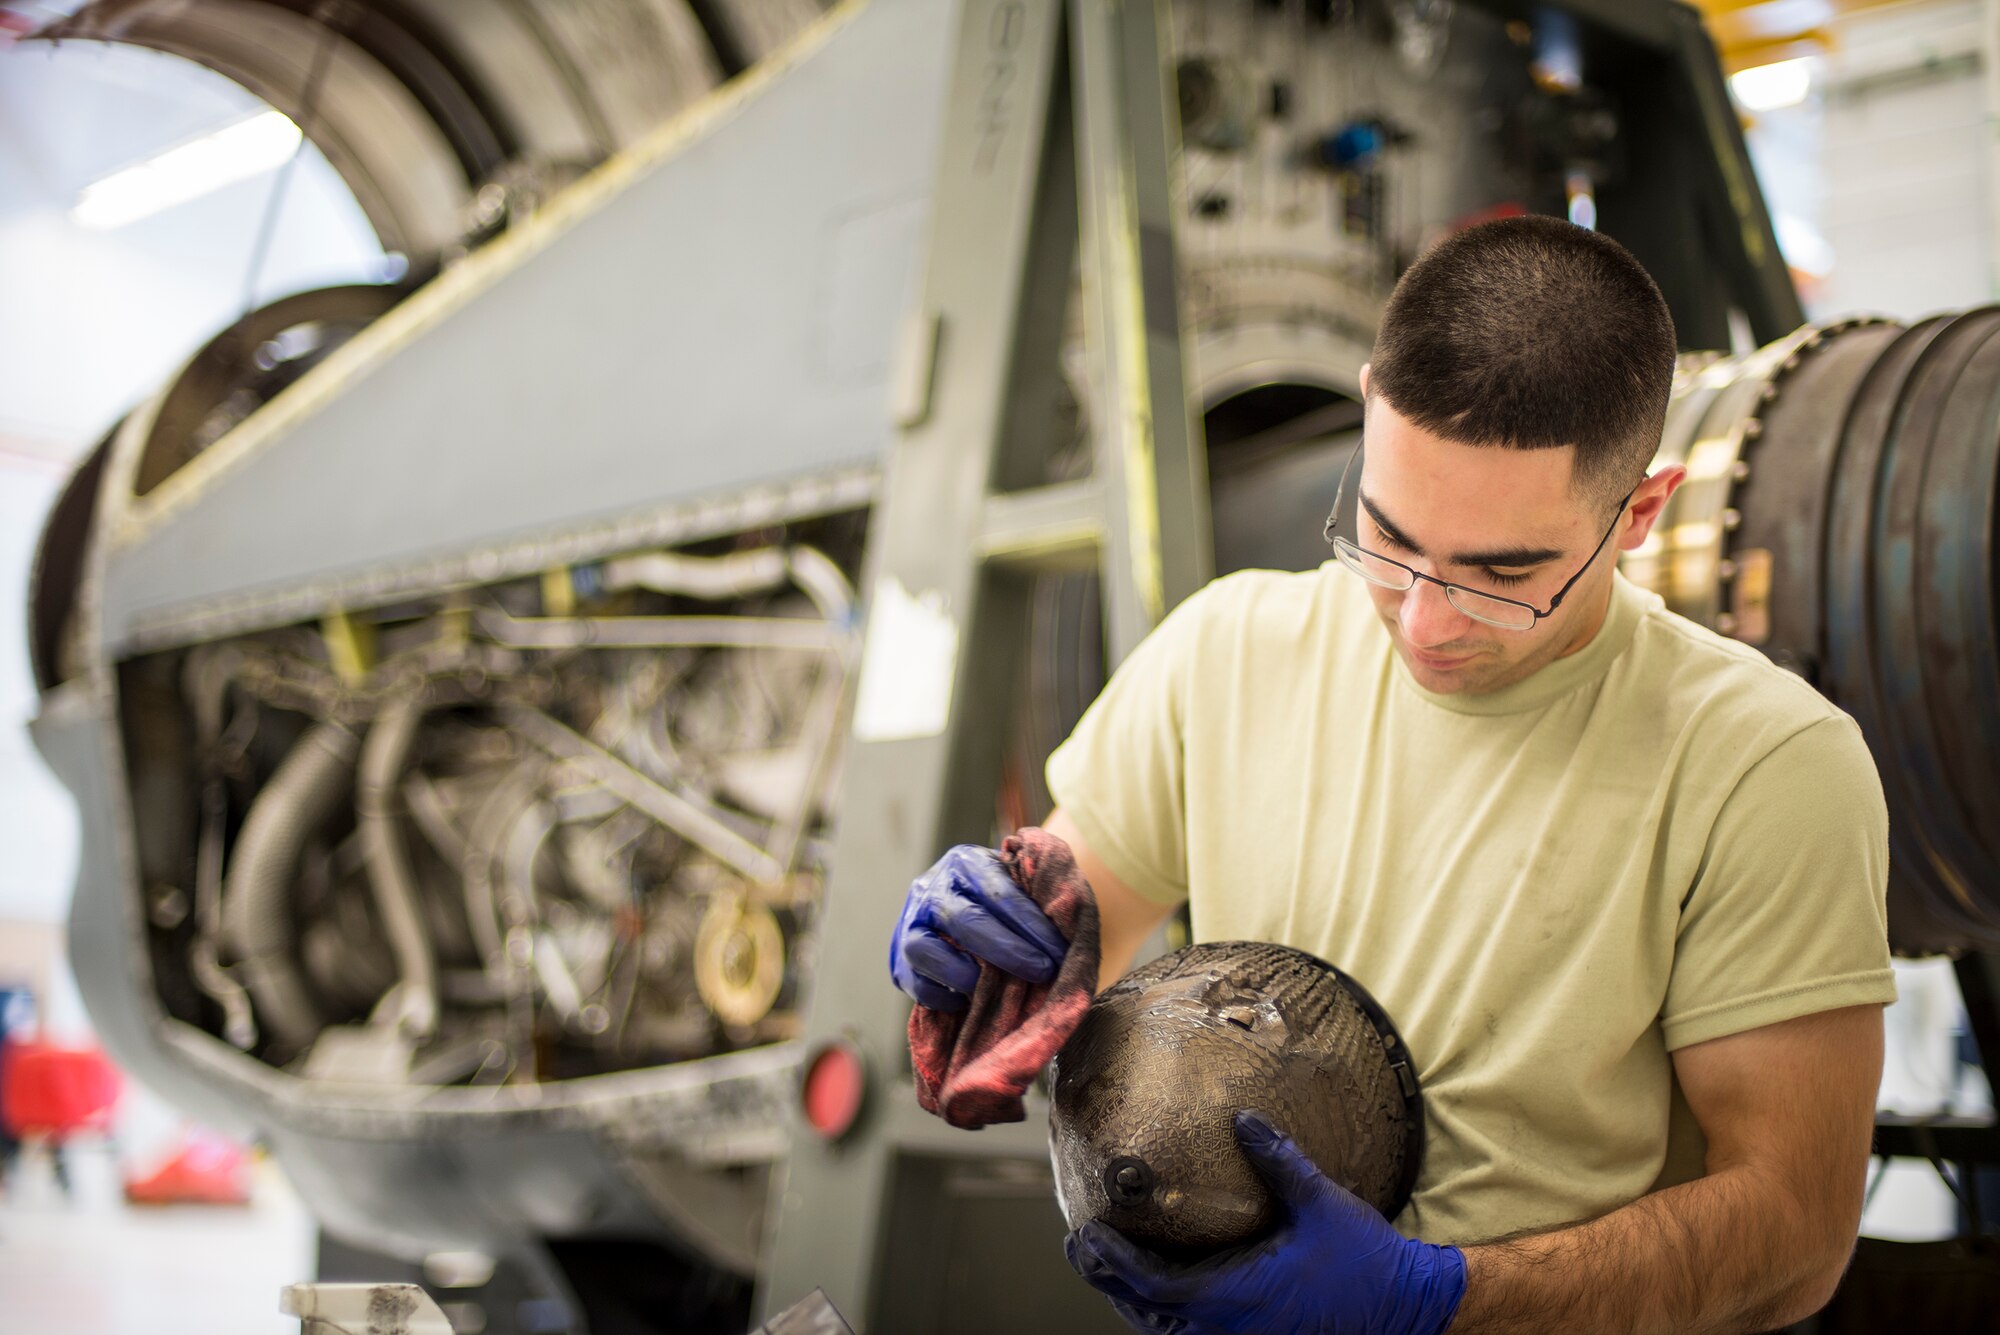 U.S. Air Force Airman 1st Class Vivek LeBouef, 723d Aircraft Maintenance Squadron aerospace propulsion apprentice, cleans parts as they are removed from a T56 engine at Moody Air Force Base, Ga., Feb. 19, 2014. The T56 is the turboprop engine installed on C-130 aircraft. (U.S. Air Force photo by Airman 1st Class Ryan Callaghan/Released)